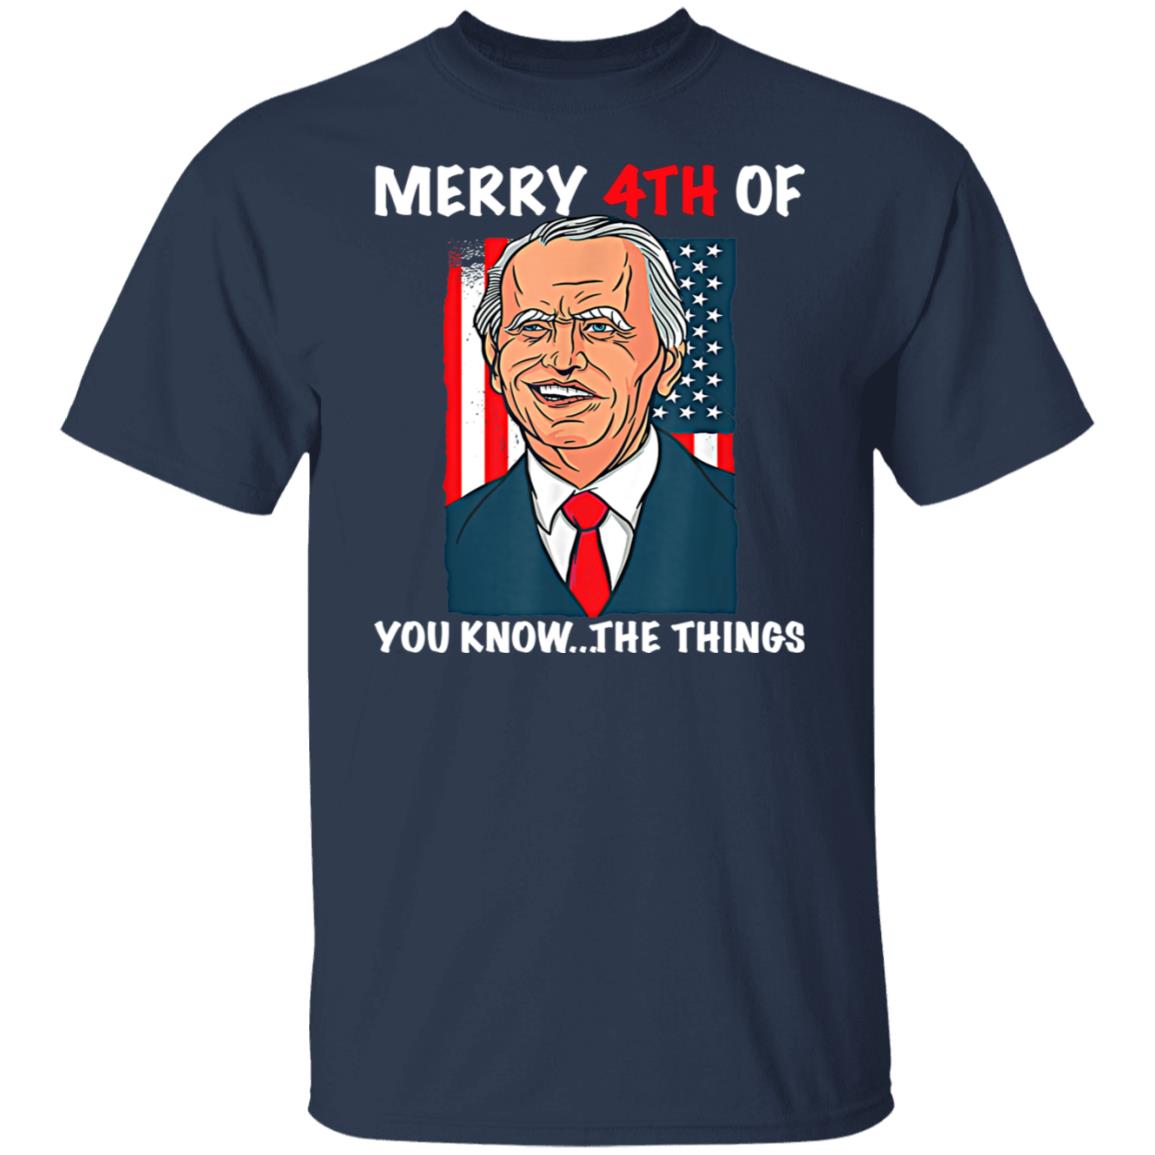 Merry 4th Of You Know The Thing Happy 4th Of July Shirt